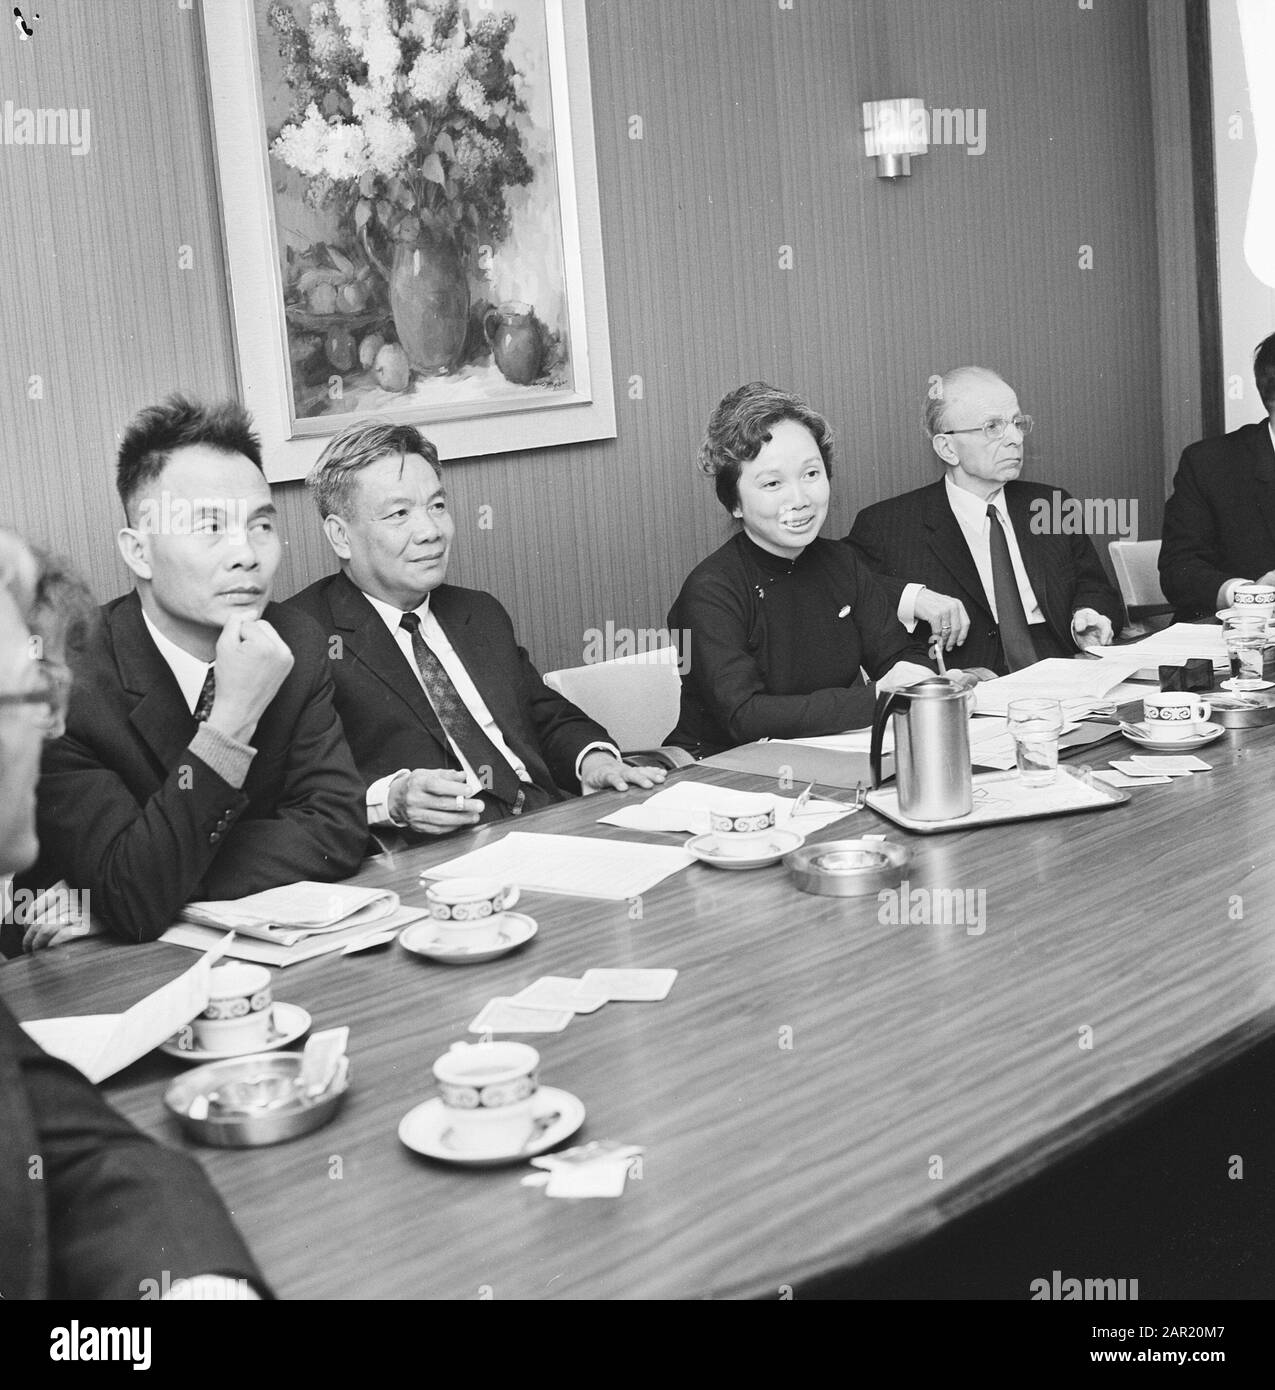 South Vietnamese minister during press conference in Amsterdam, Mr Huynh van Nghi, husband of Minister Dr. Tran Ngoc Dang Mrs Hoa Date: 1 May 1974 Location: Amsterdam, Noord-Holland Keywords: ministers, press conferences Stock Photo